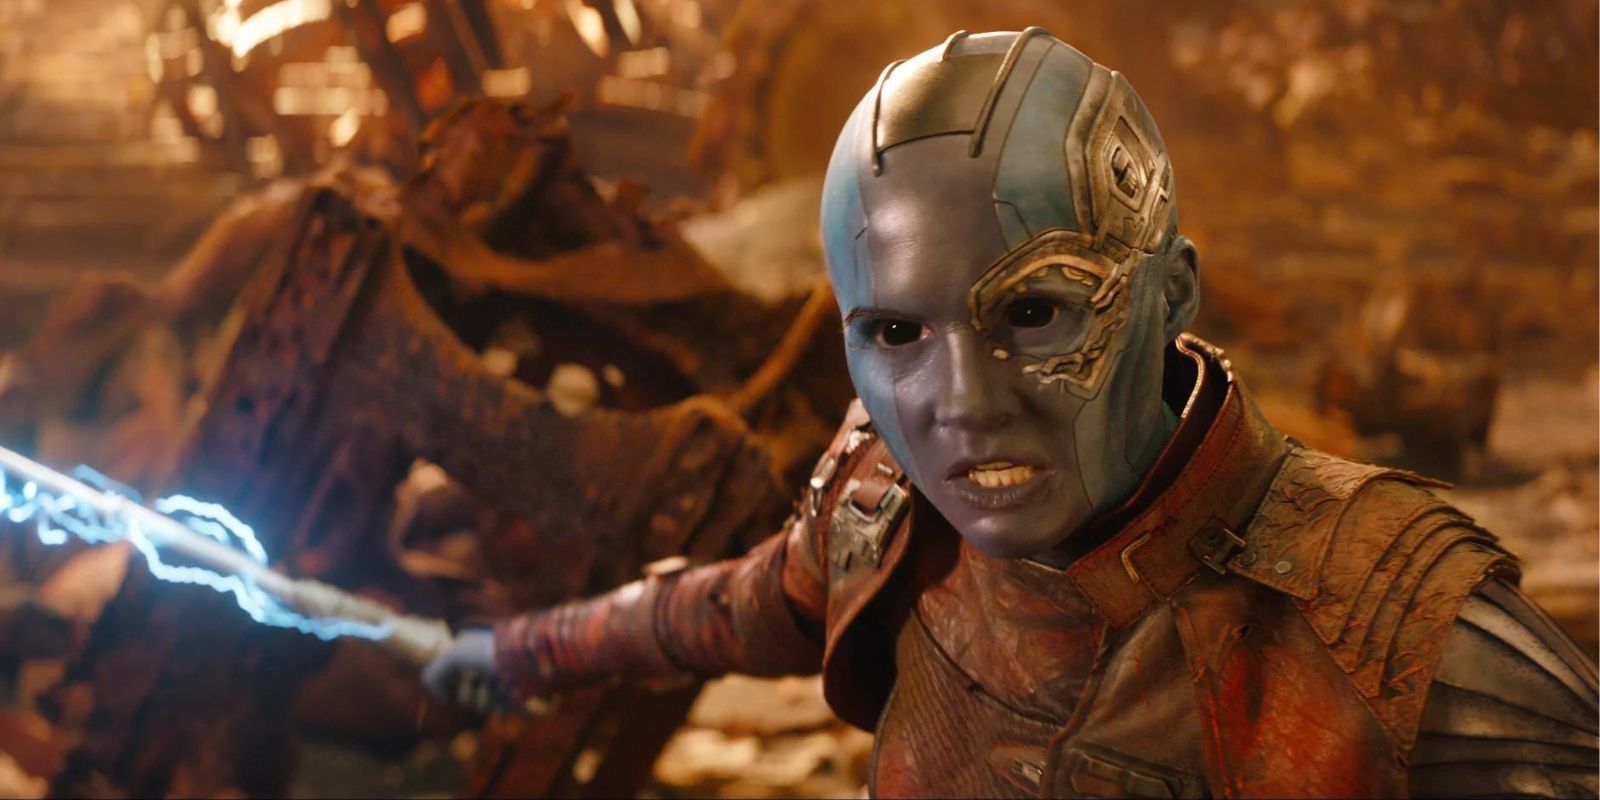 Nebula, played by Karen Gilan, looking ready to fight in the MCU